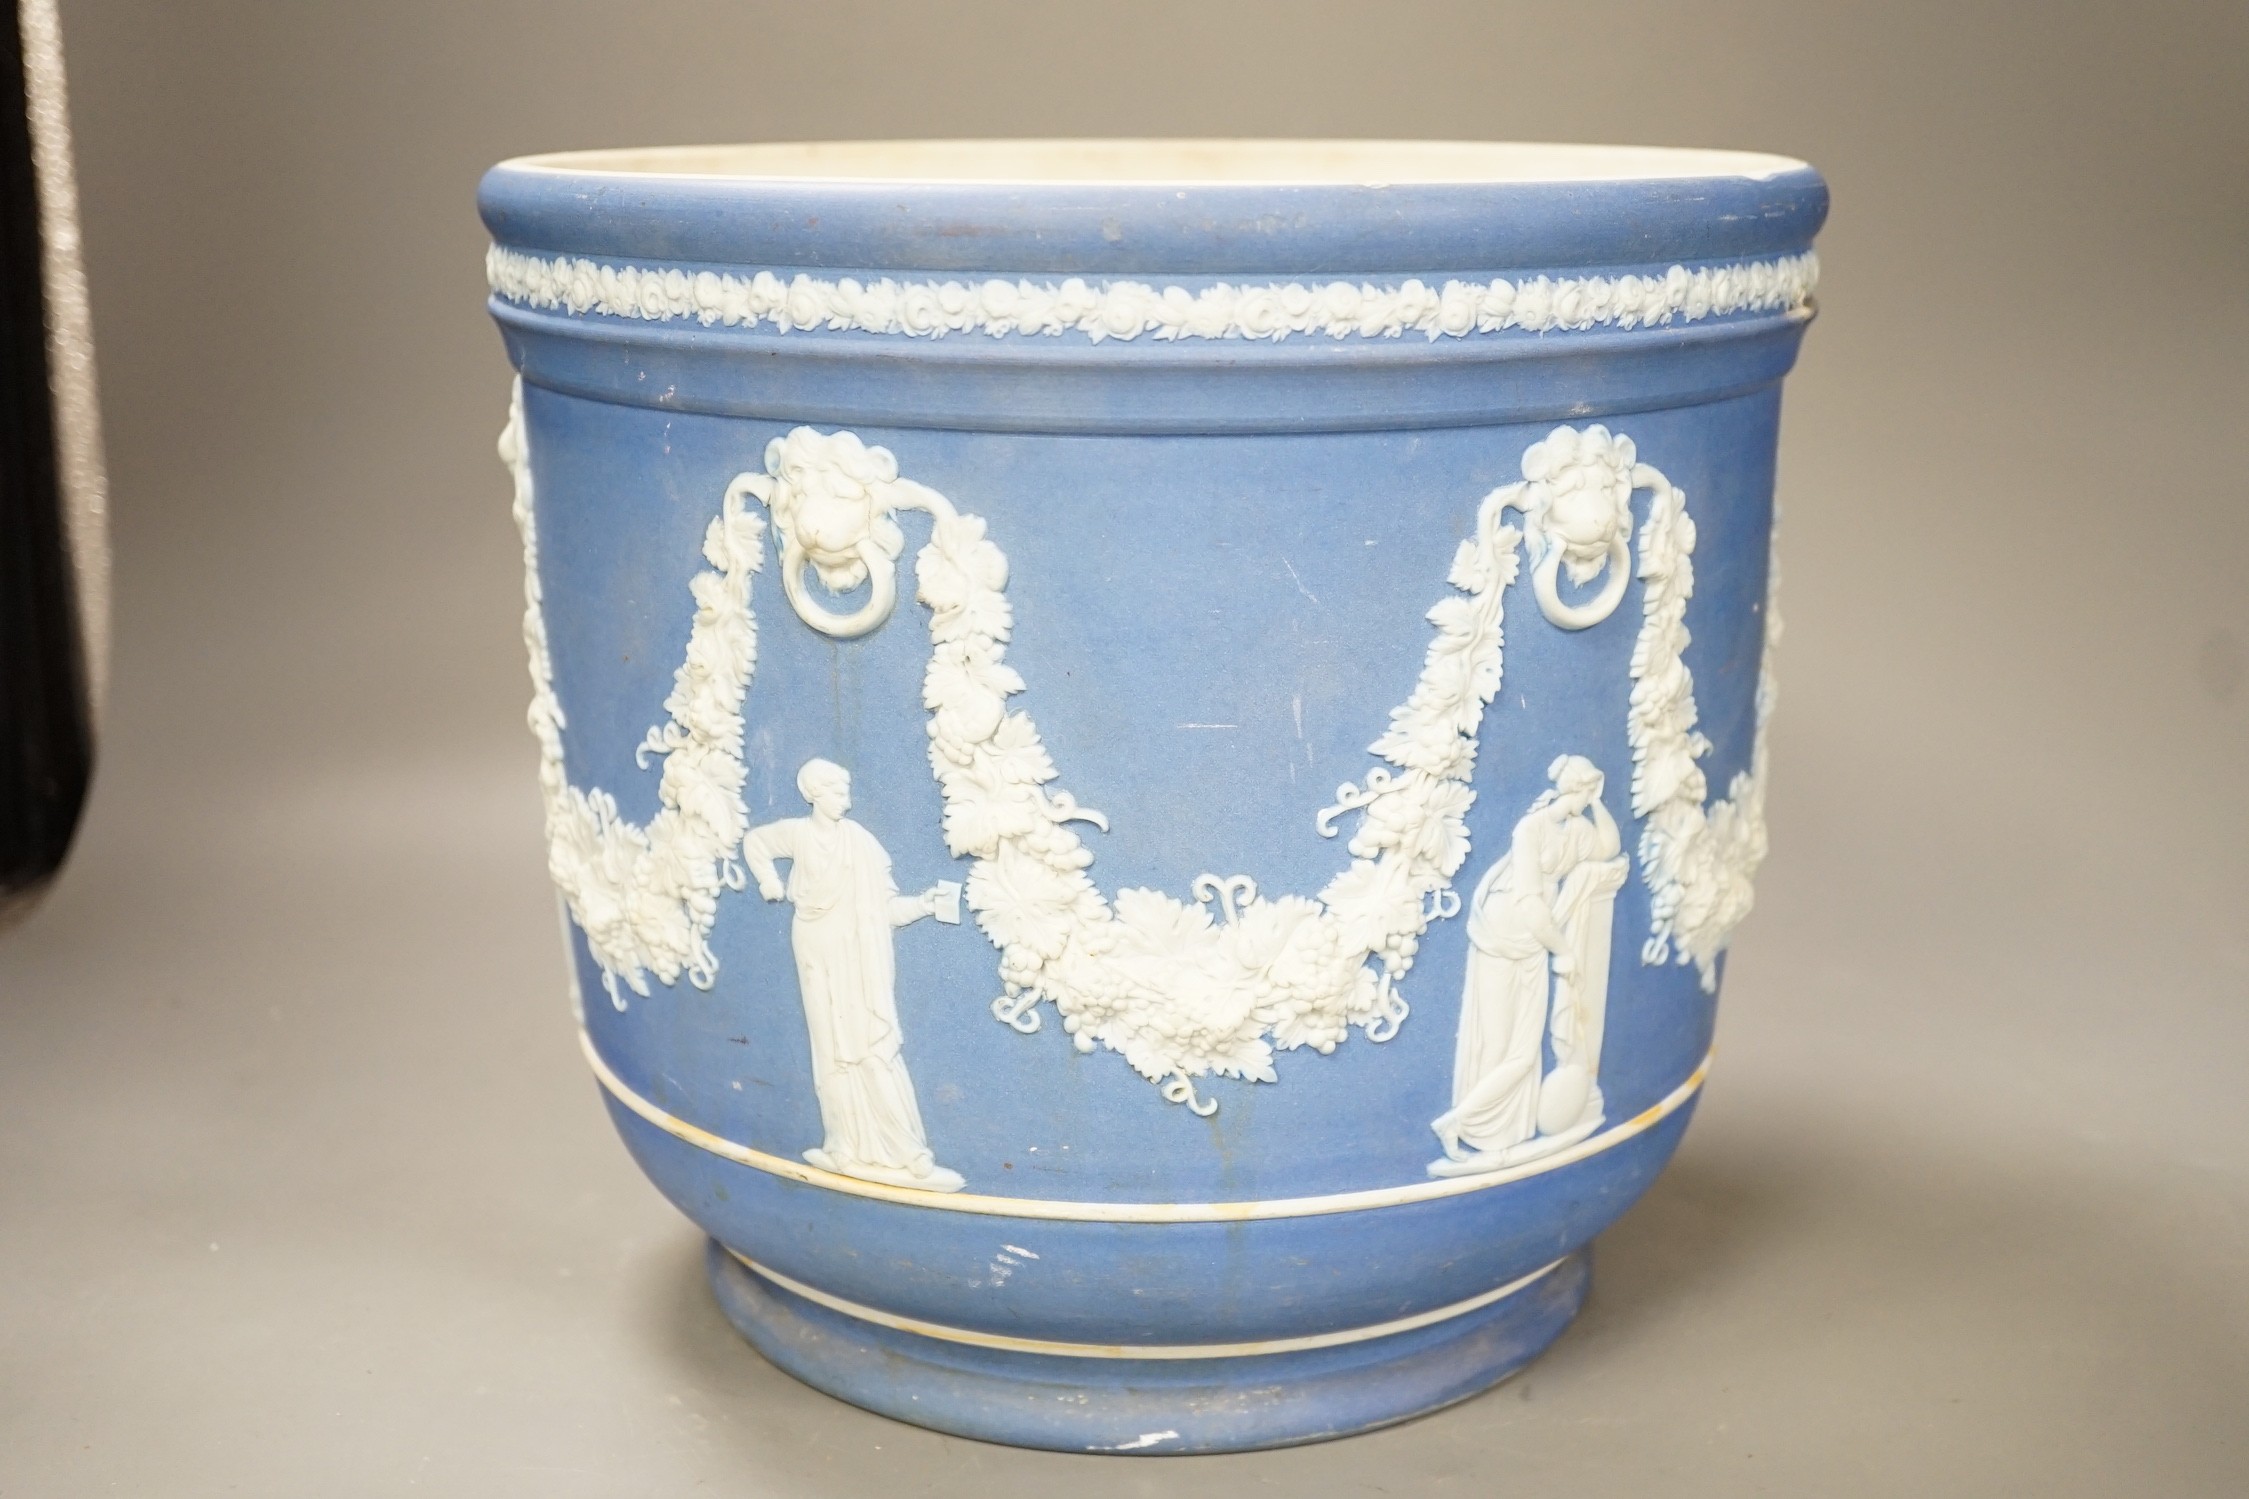 A Wedgwood blue jasper jardiniere, sprigged with muses and swags, height 23cm